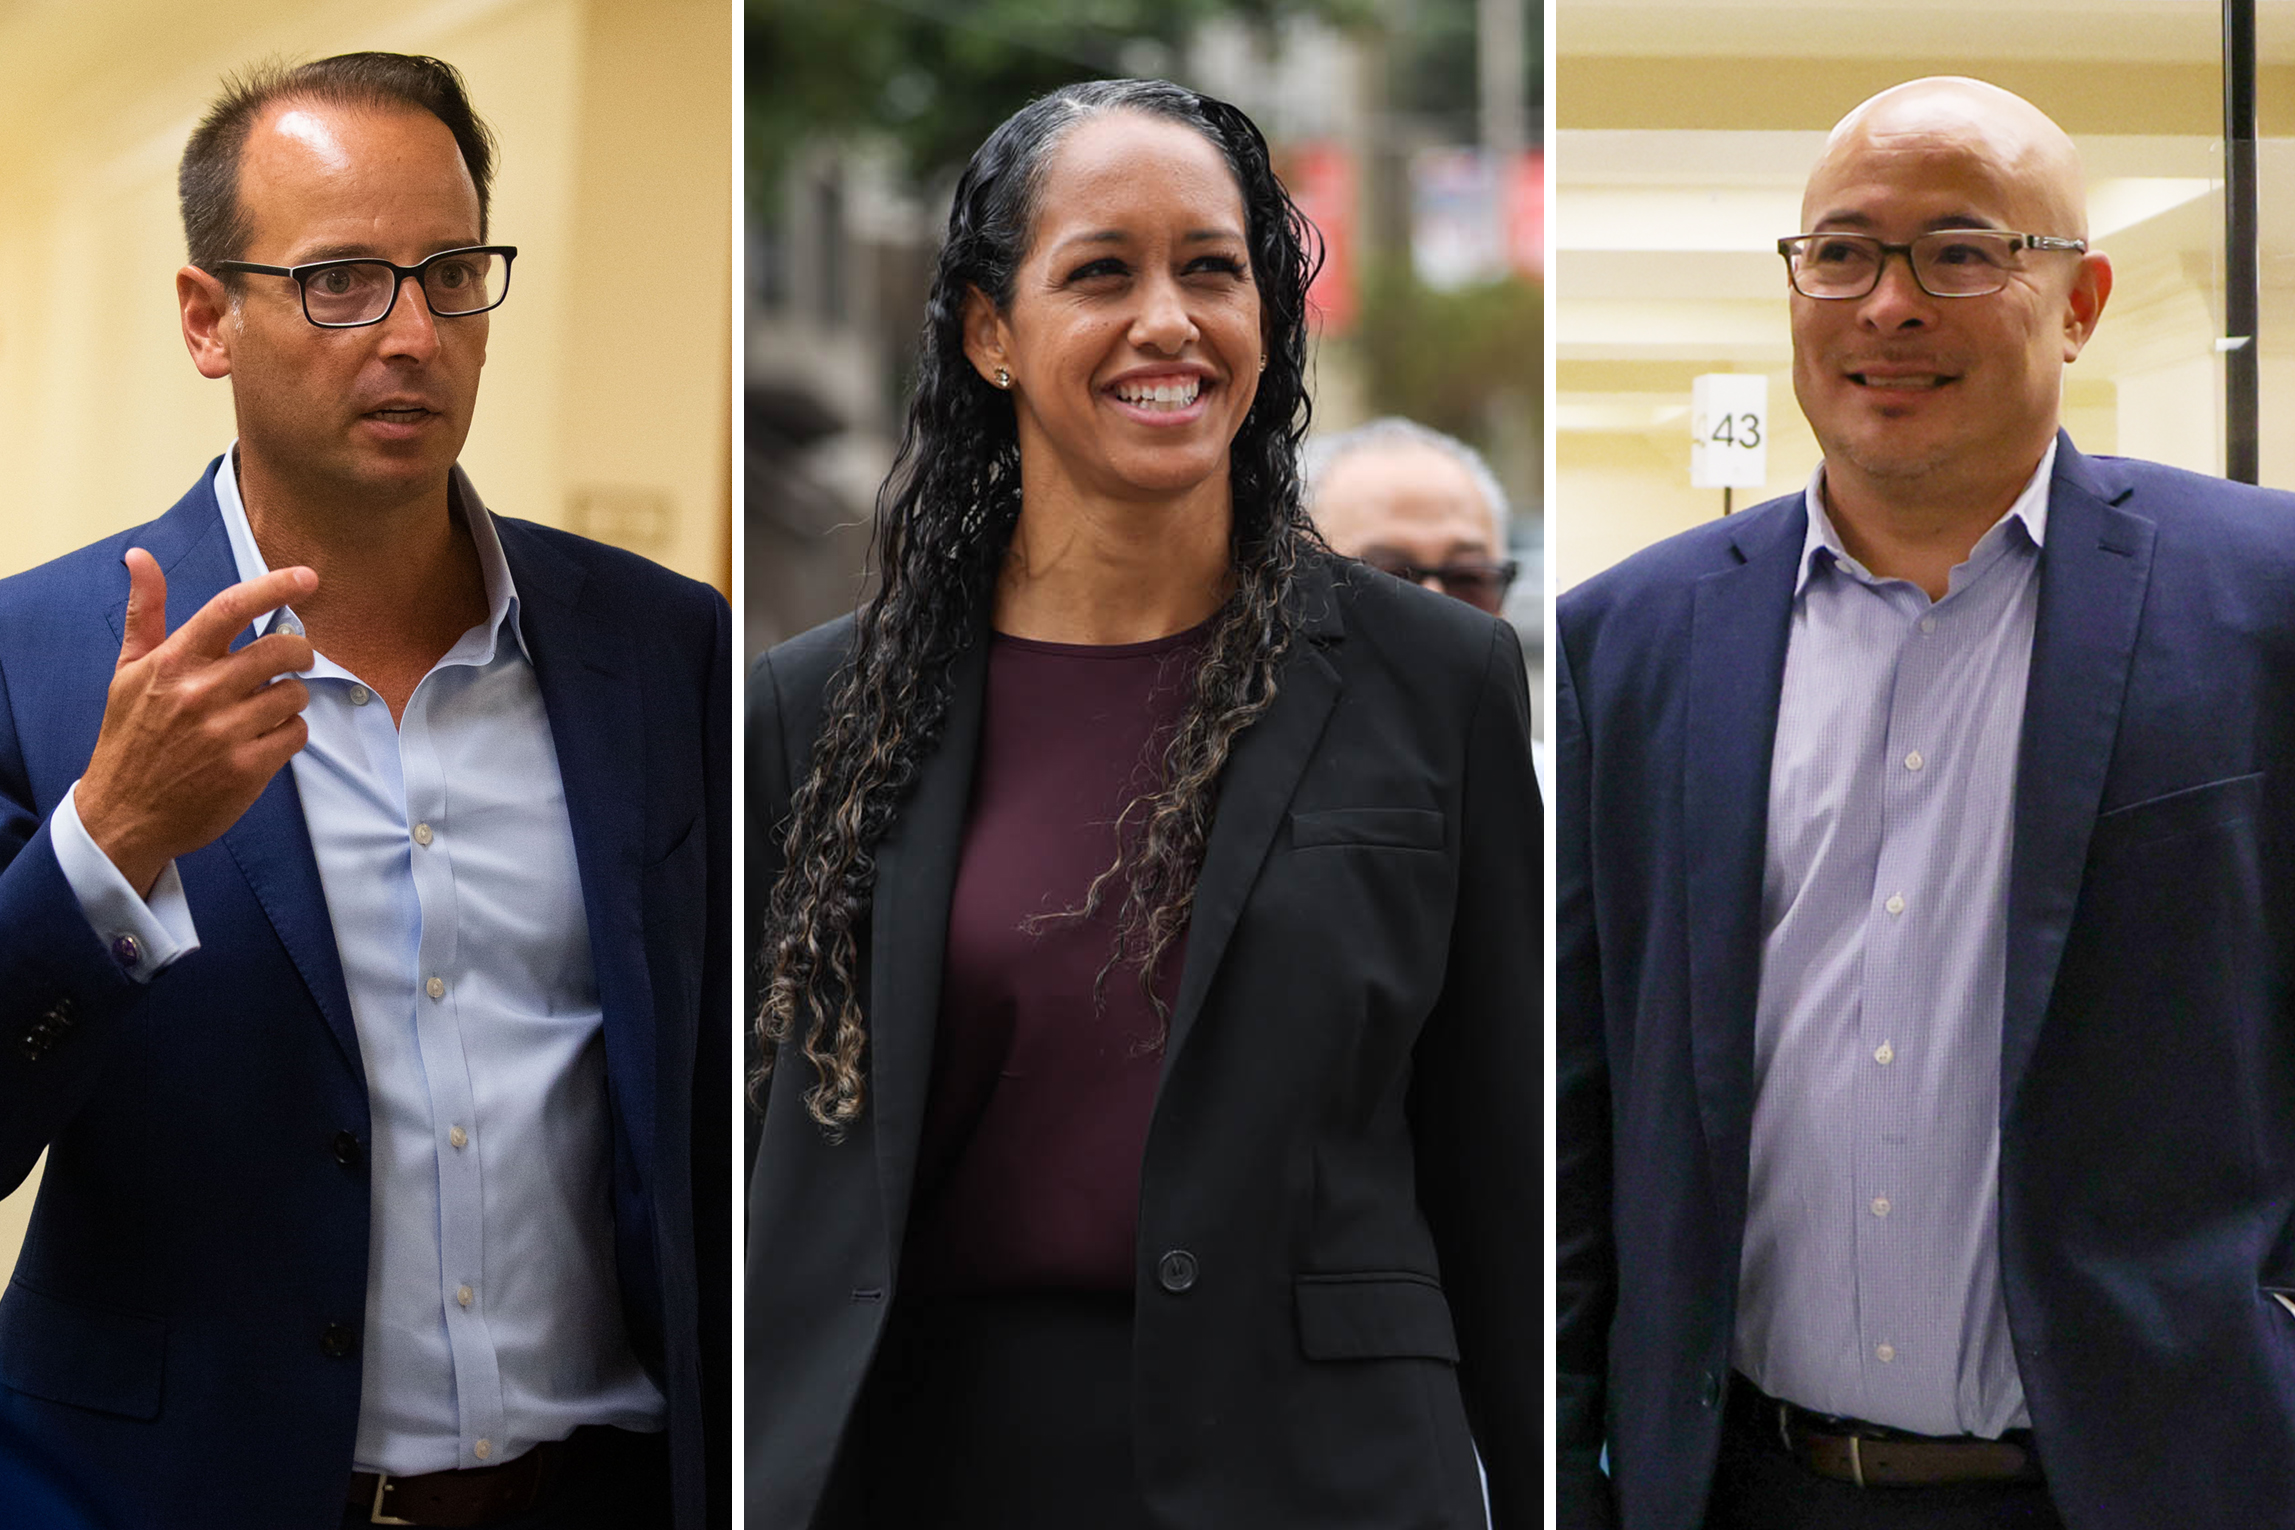 SF district attorney race: Who’s winning the fundraising battle?